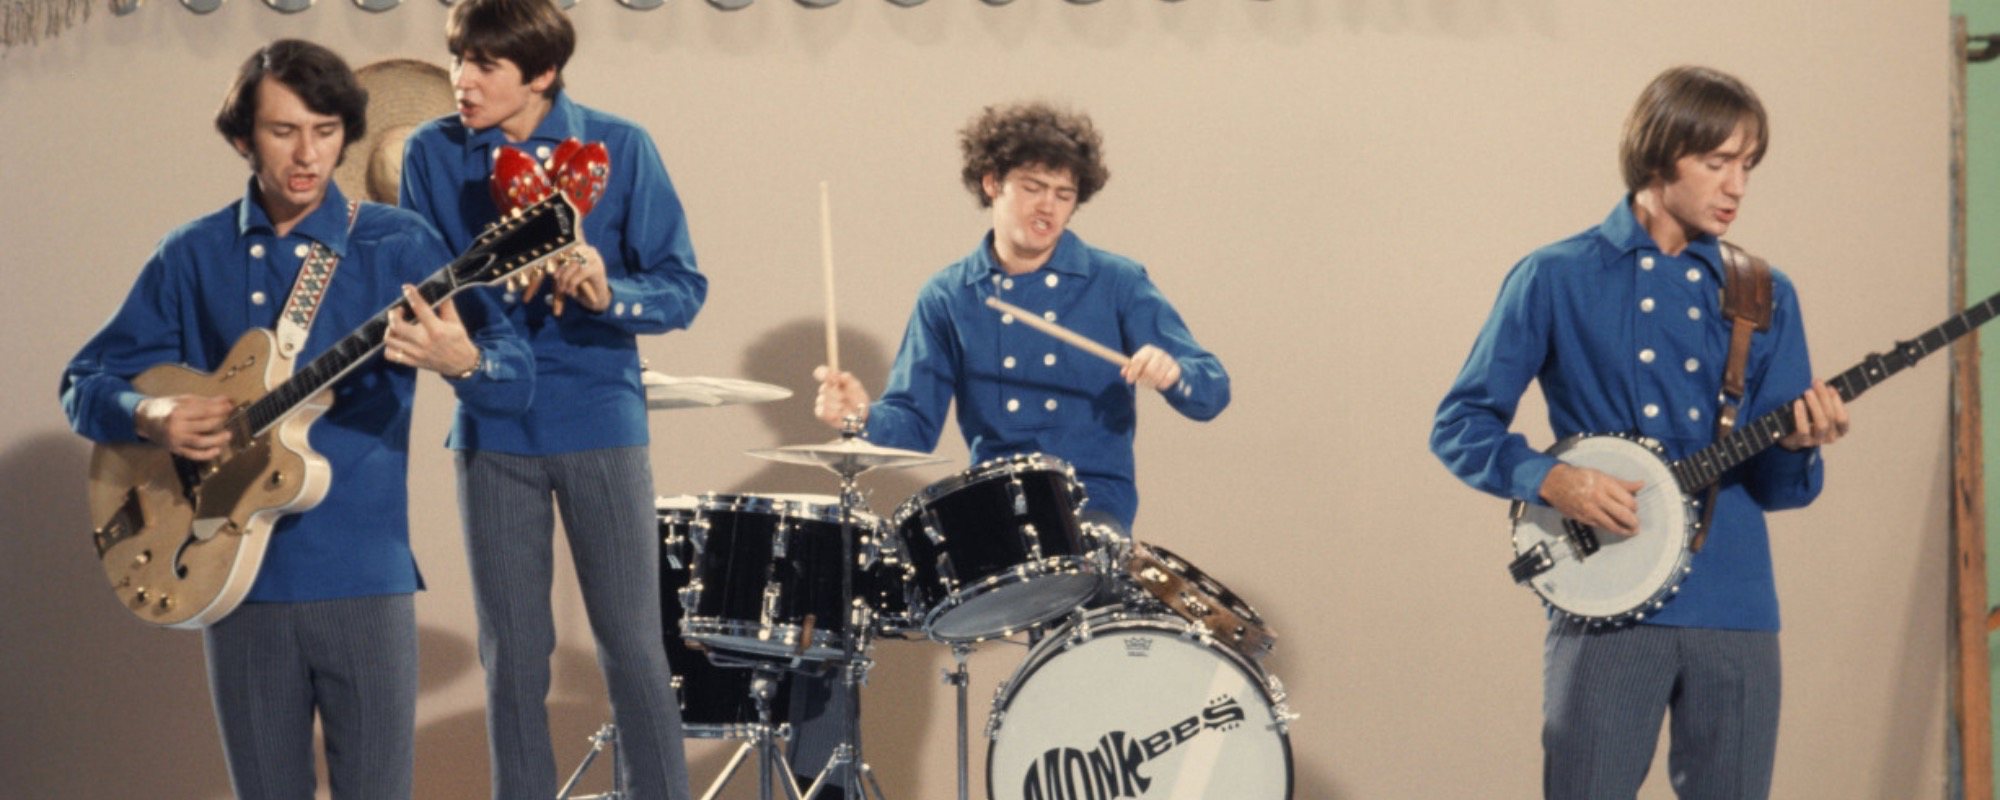 Micky Dolenz Celebrates 55 Years of The Monkees’ ‘Headquarters’ with 2023 Tour, Anniversary Box Set